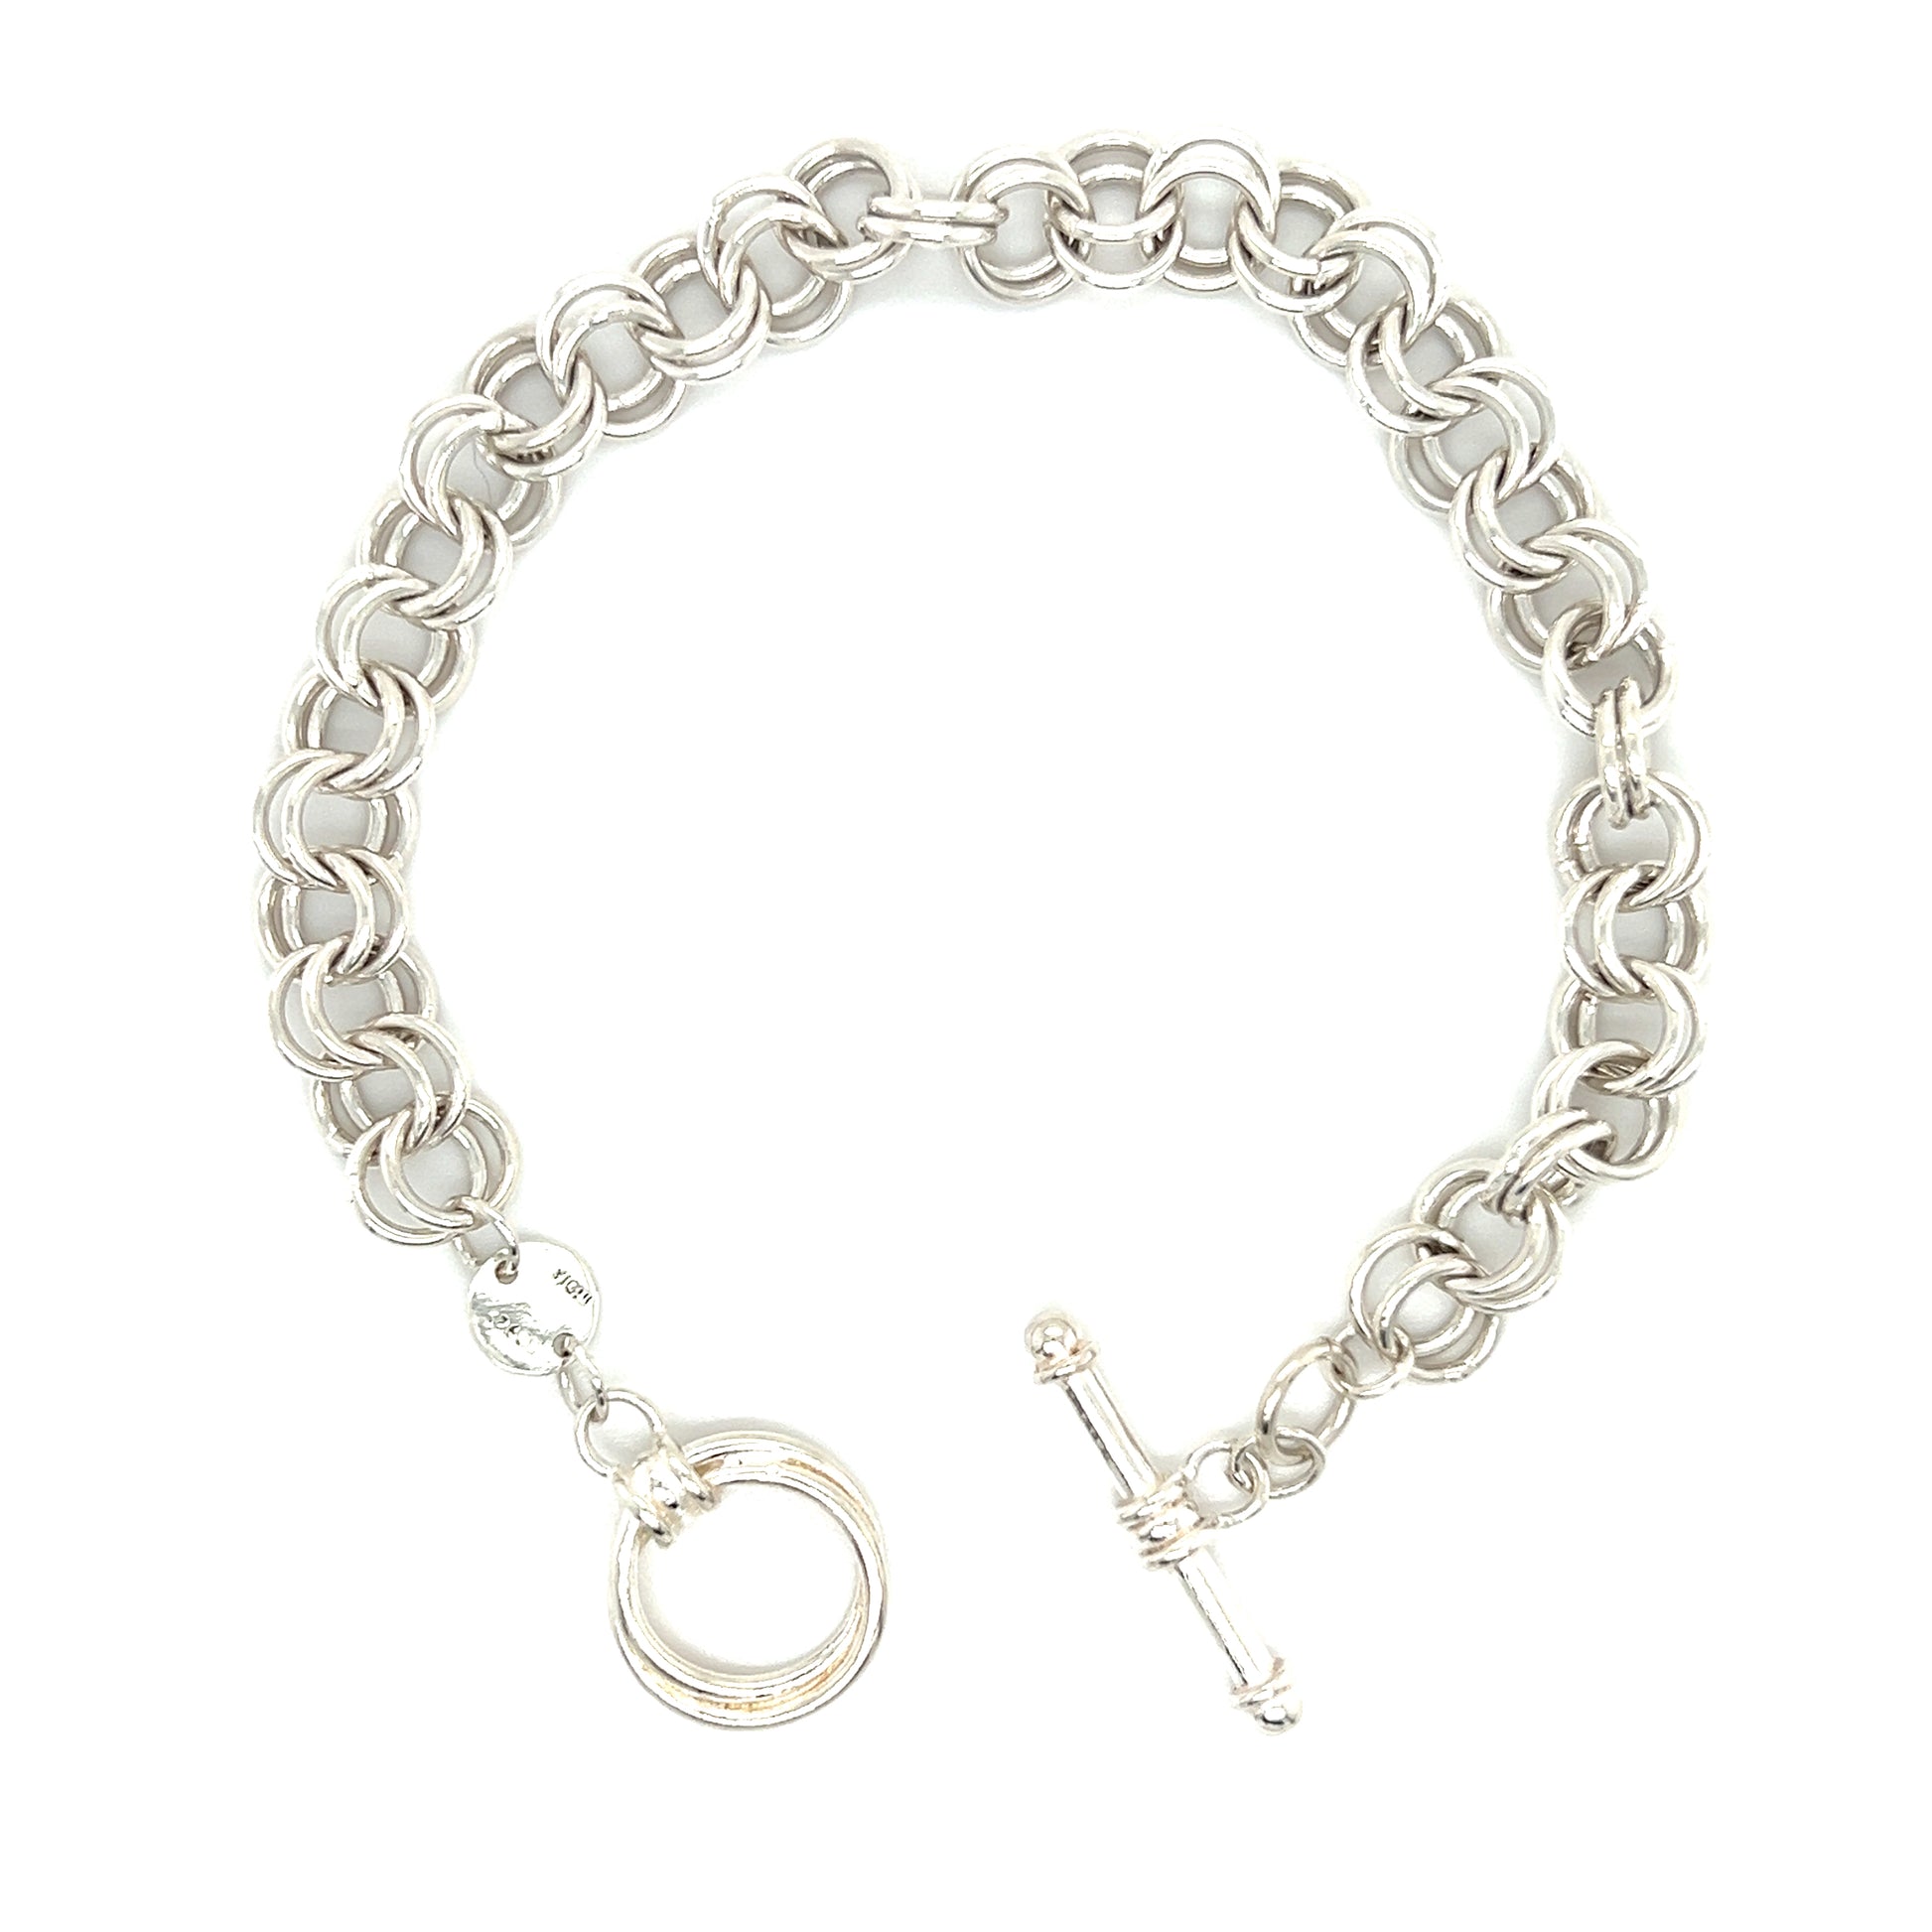 Double Link Chram Bracelet with Toggle Clasp in Sterling Silver Round Open Clasp View